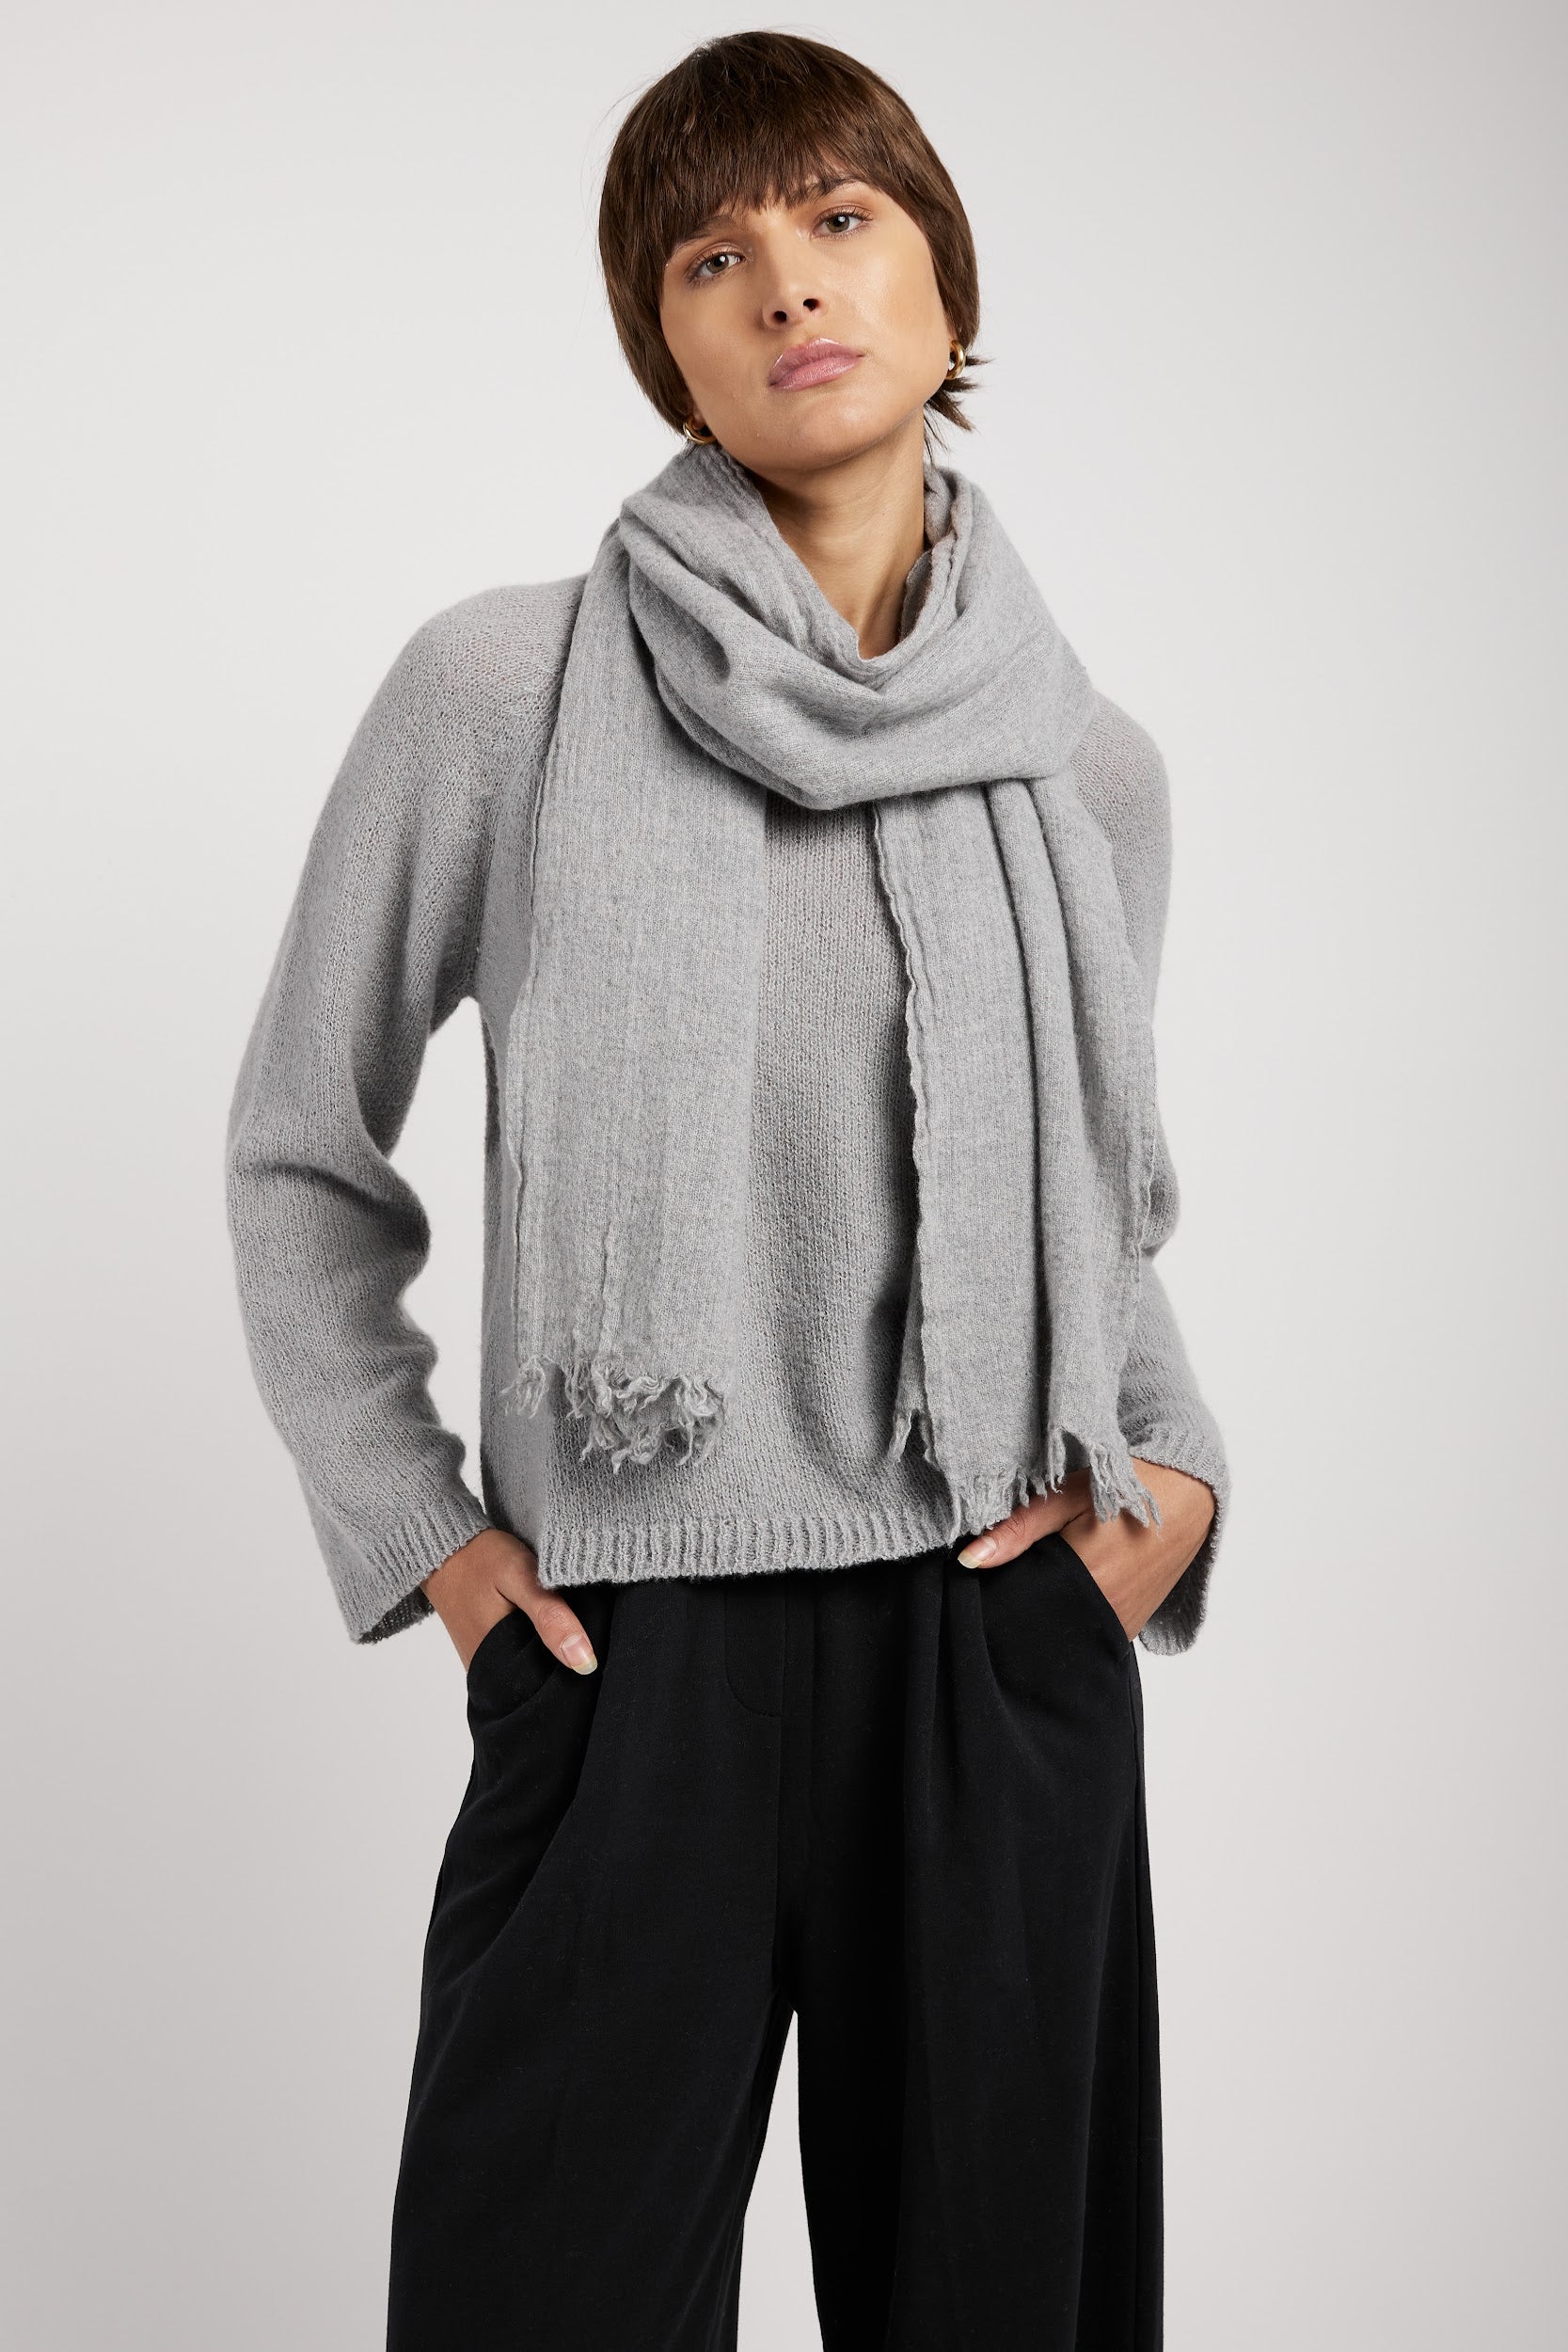 PRIVATE 0204 Cashmere Scarf in Heather Grey